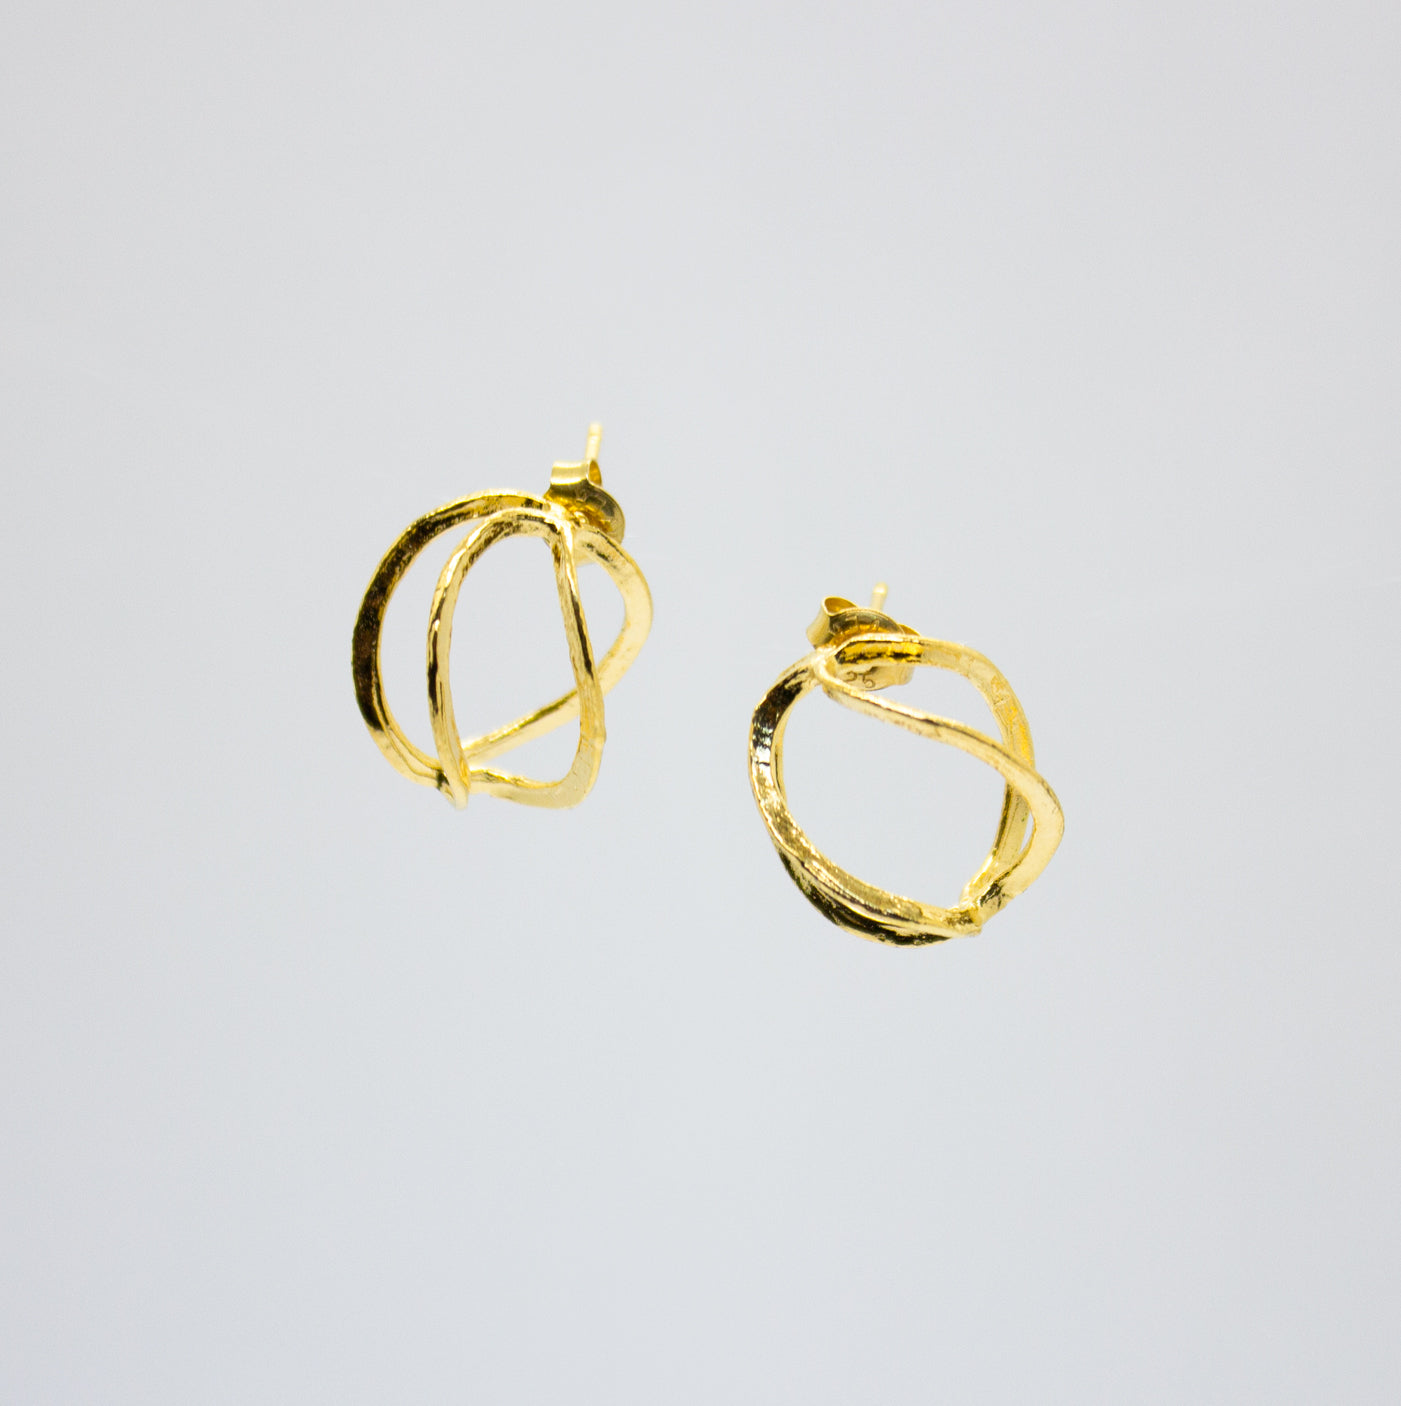 Earrings with Cage Shapes